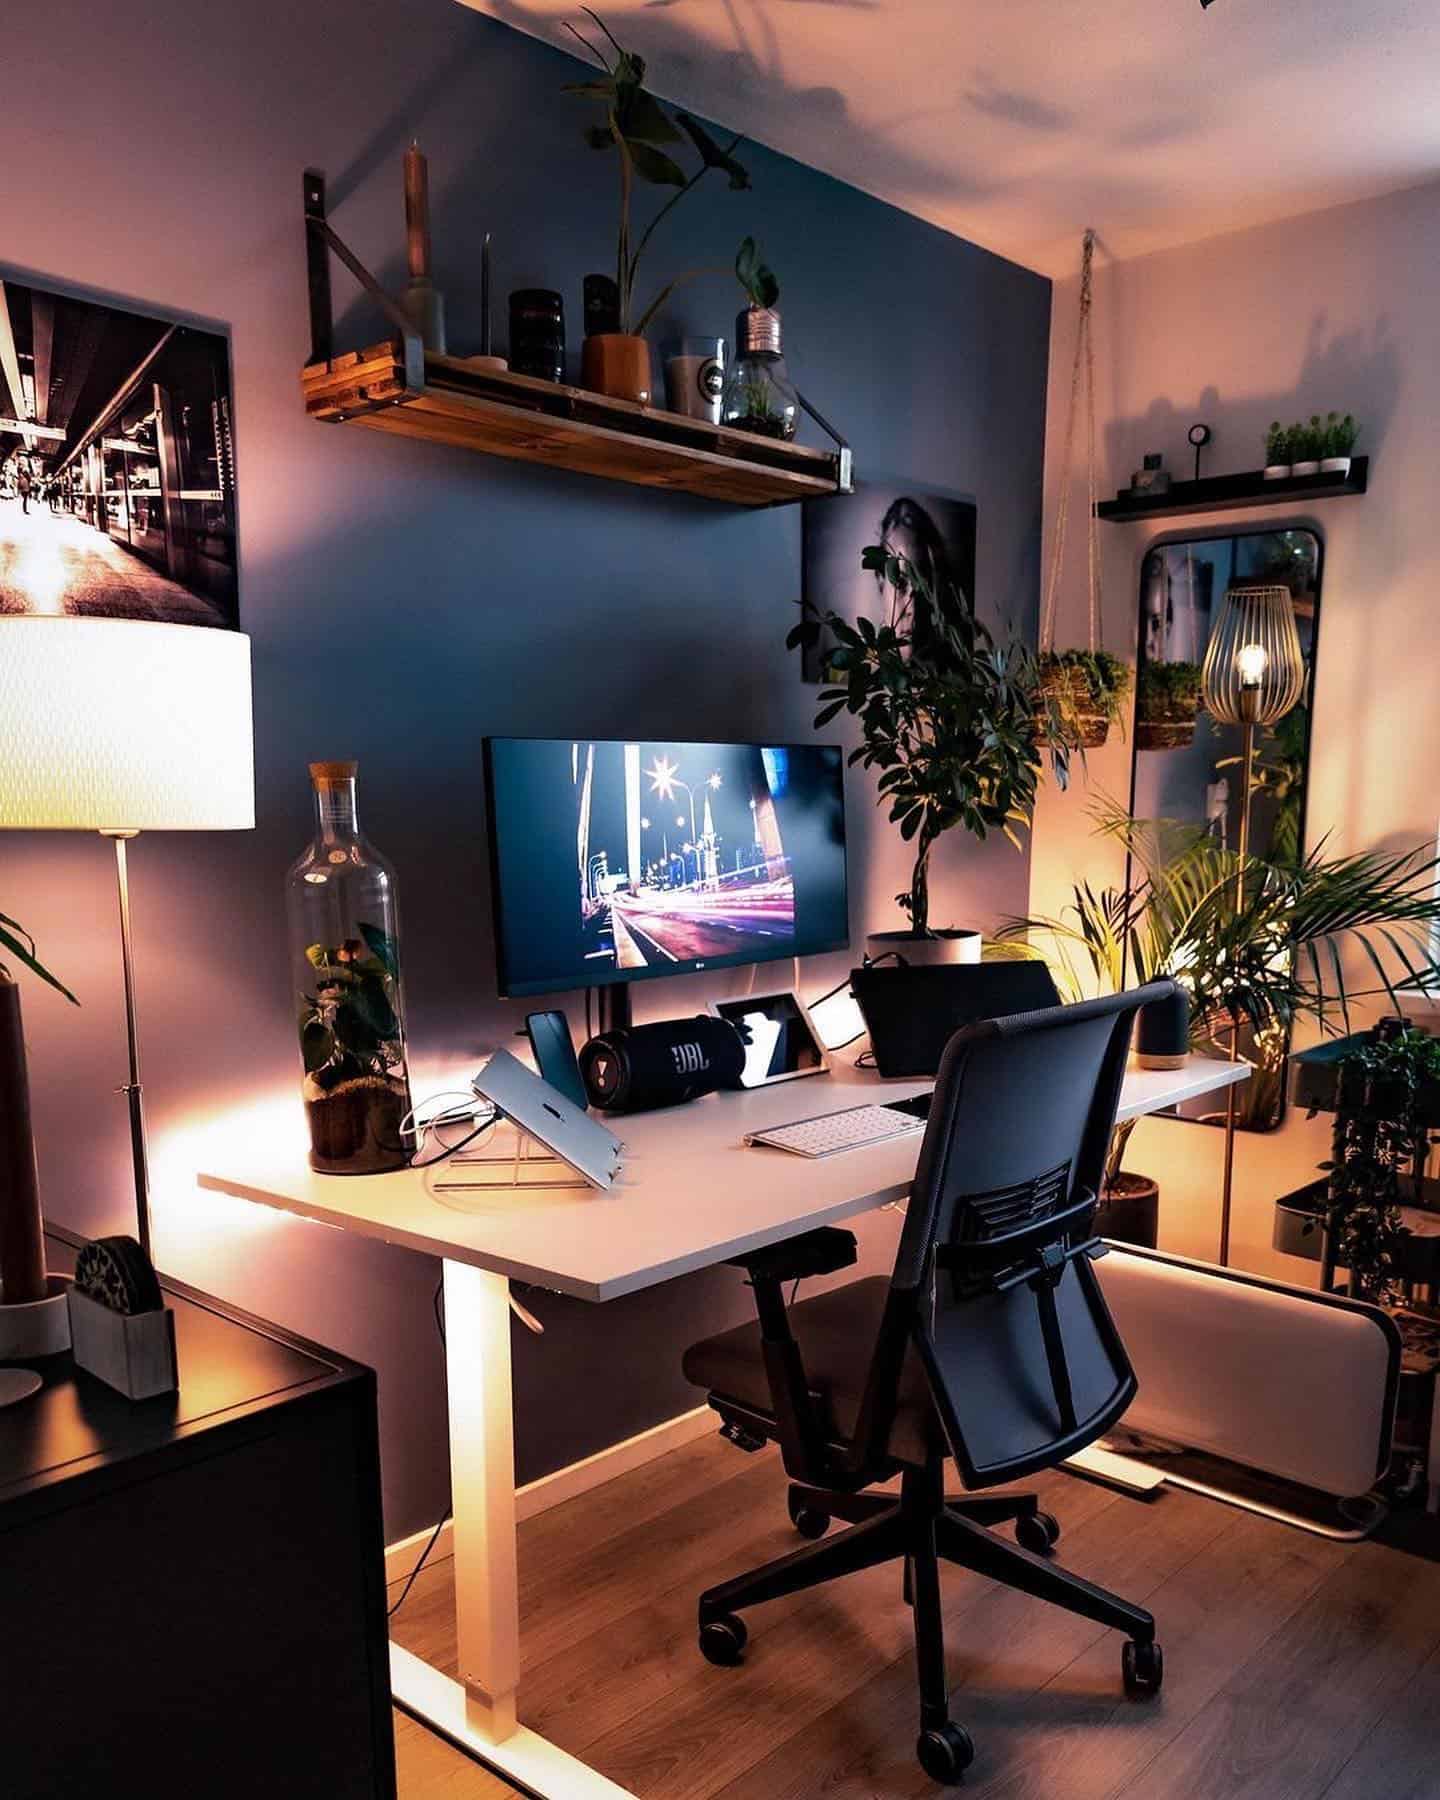 How To Setup A Home Office - Full guide And Ideas - Remote Tribe